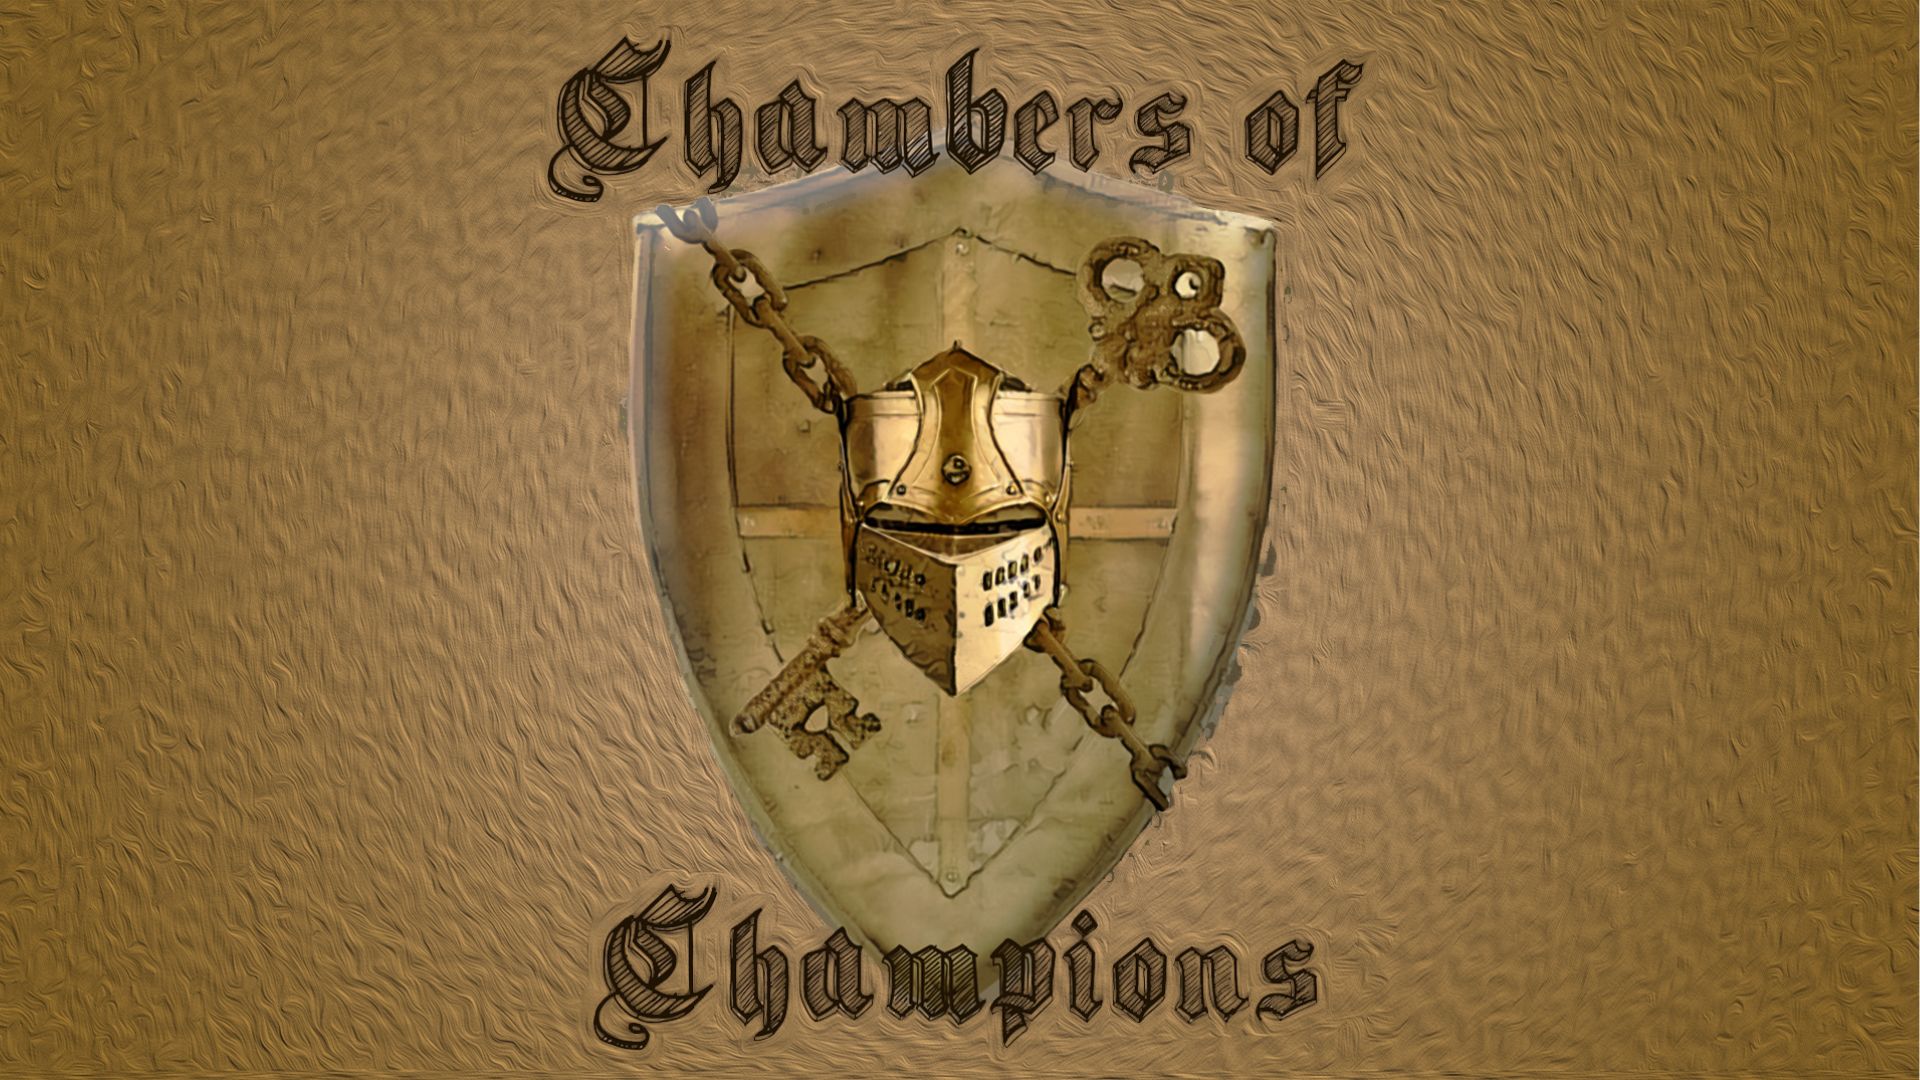 10 persons - Chambers of Champions